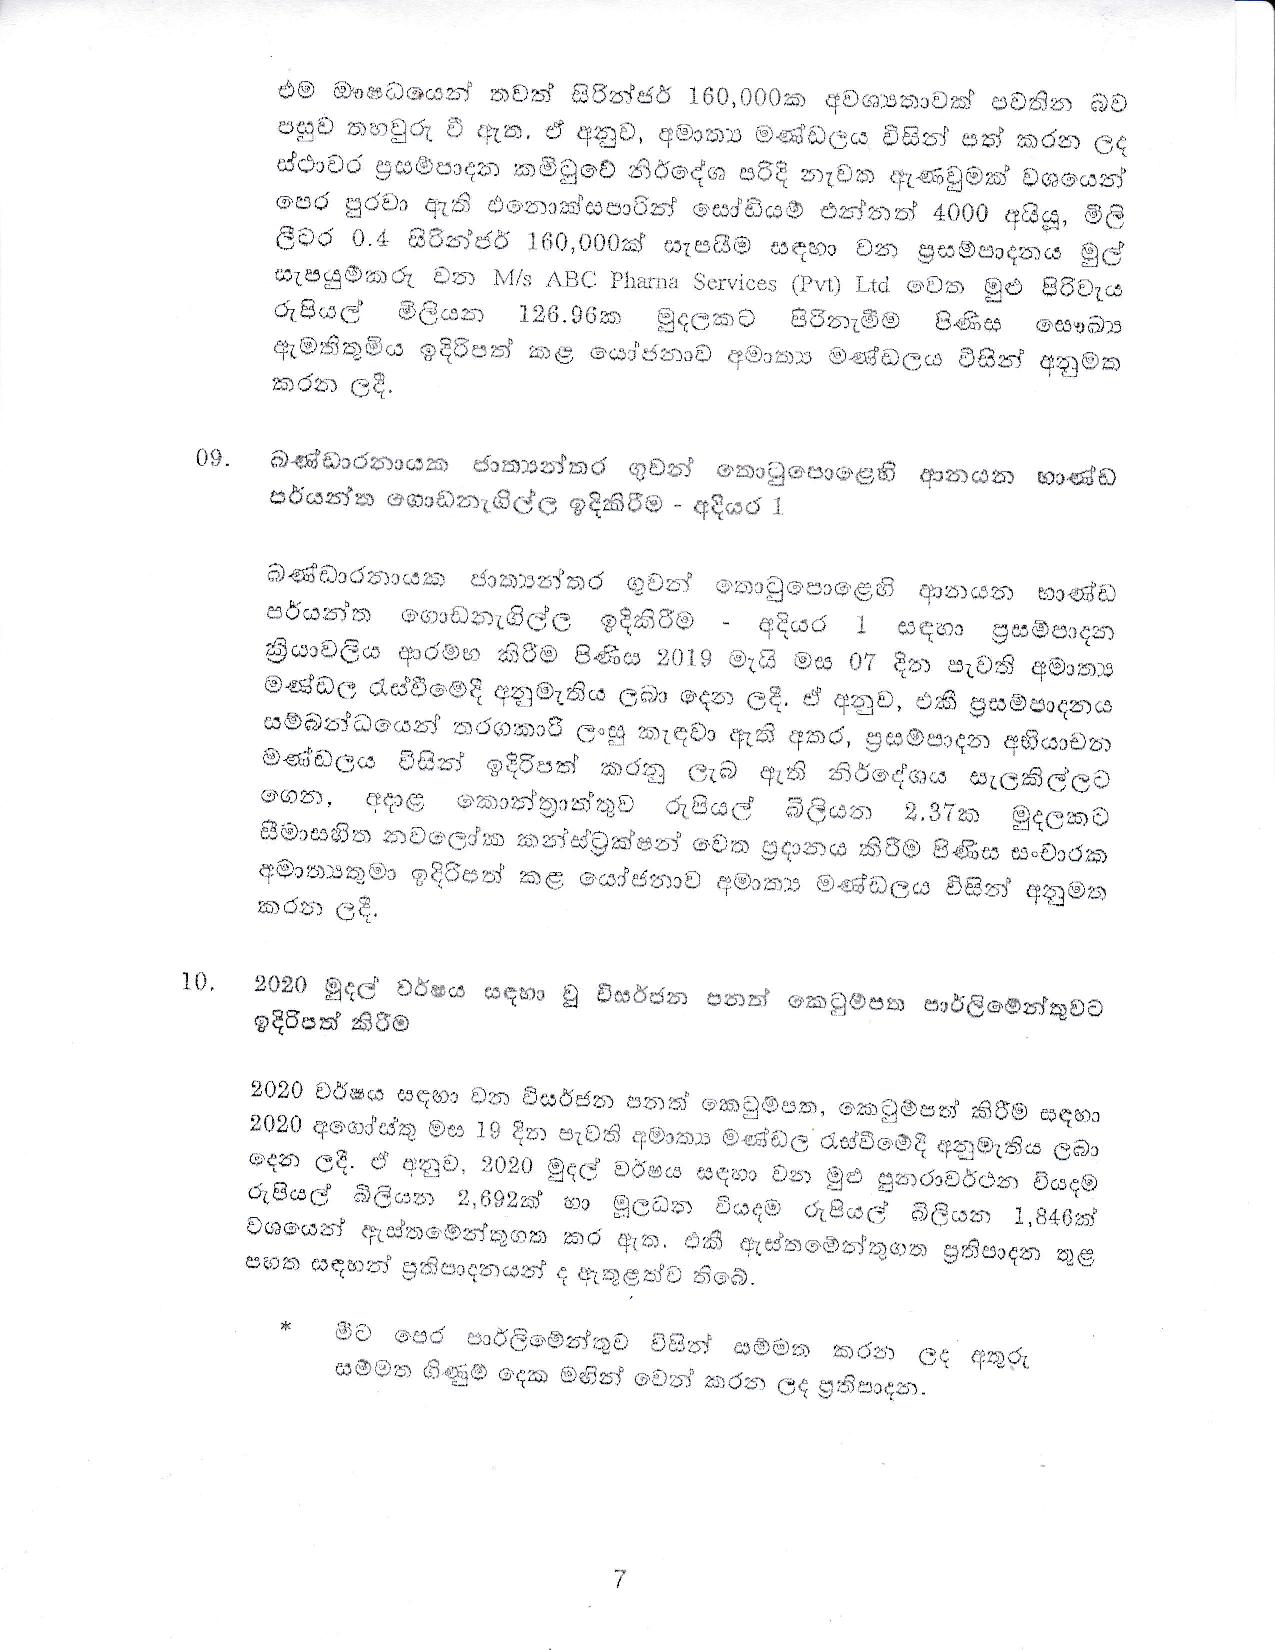 Cabinet Decision on 05.10.2020 page 007